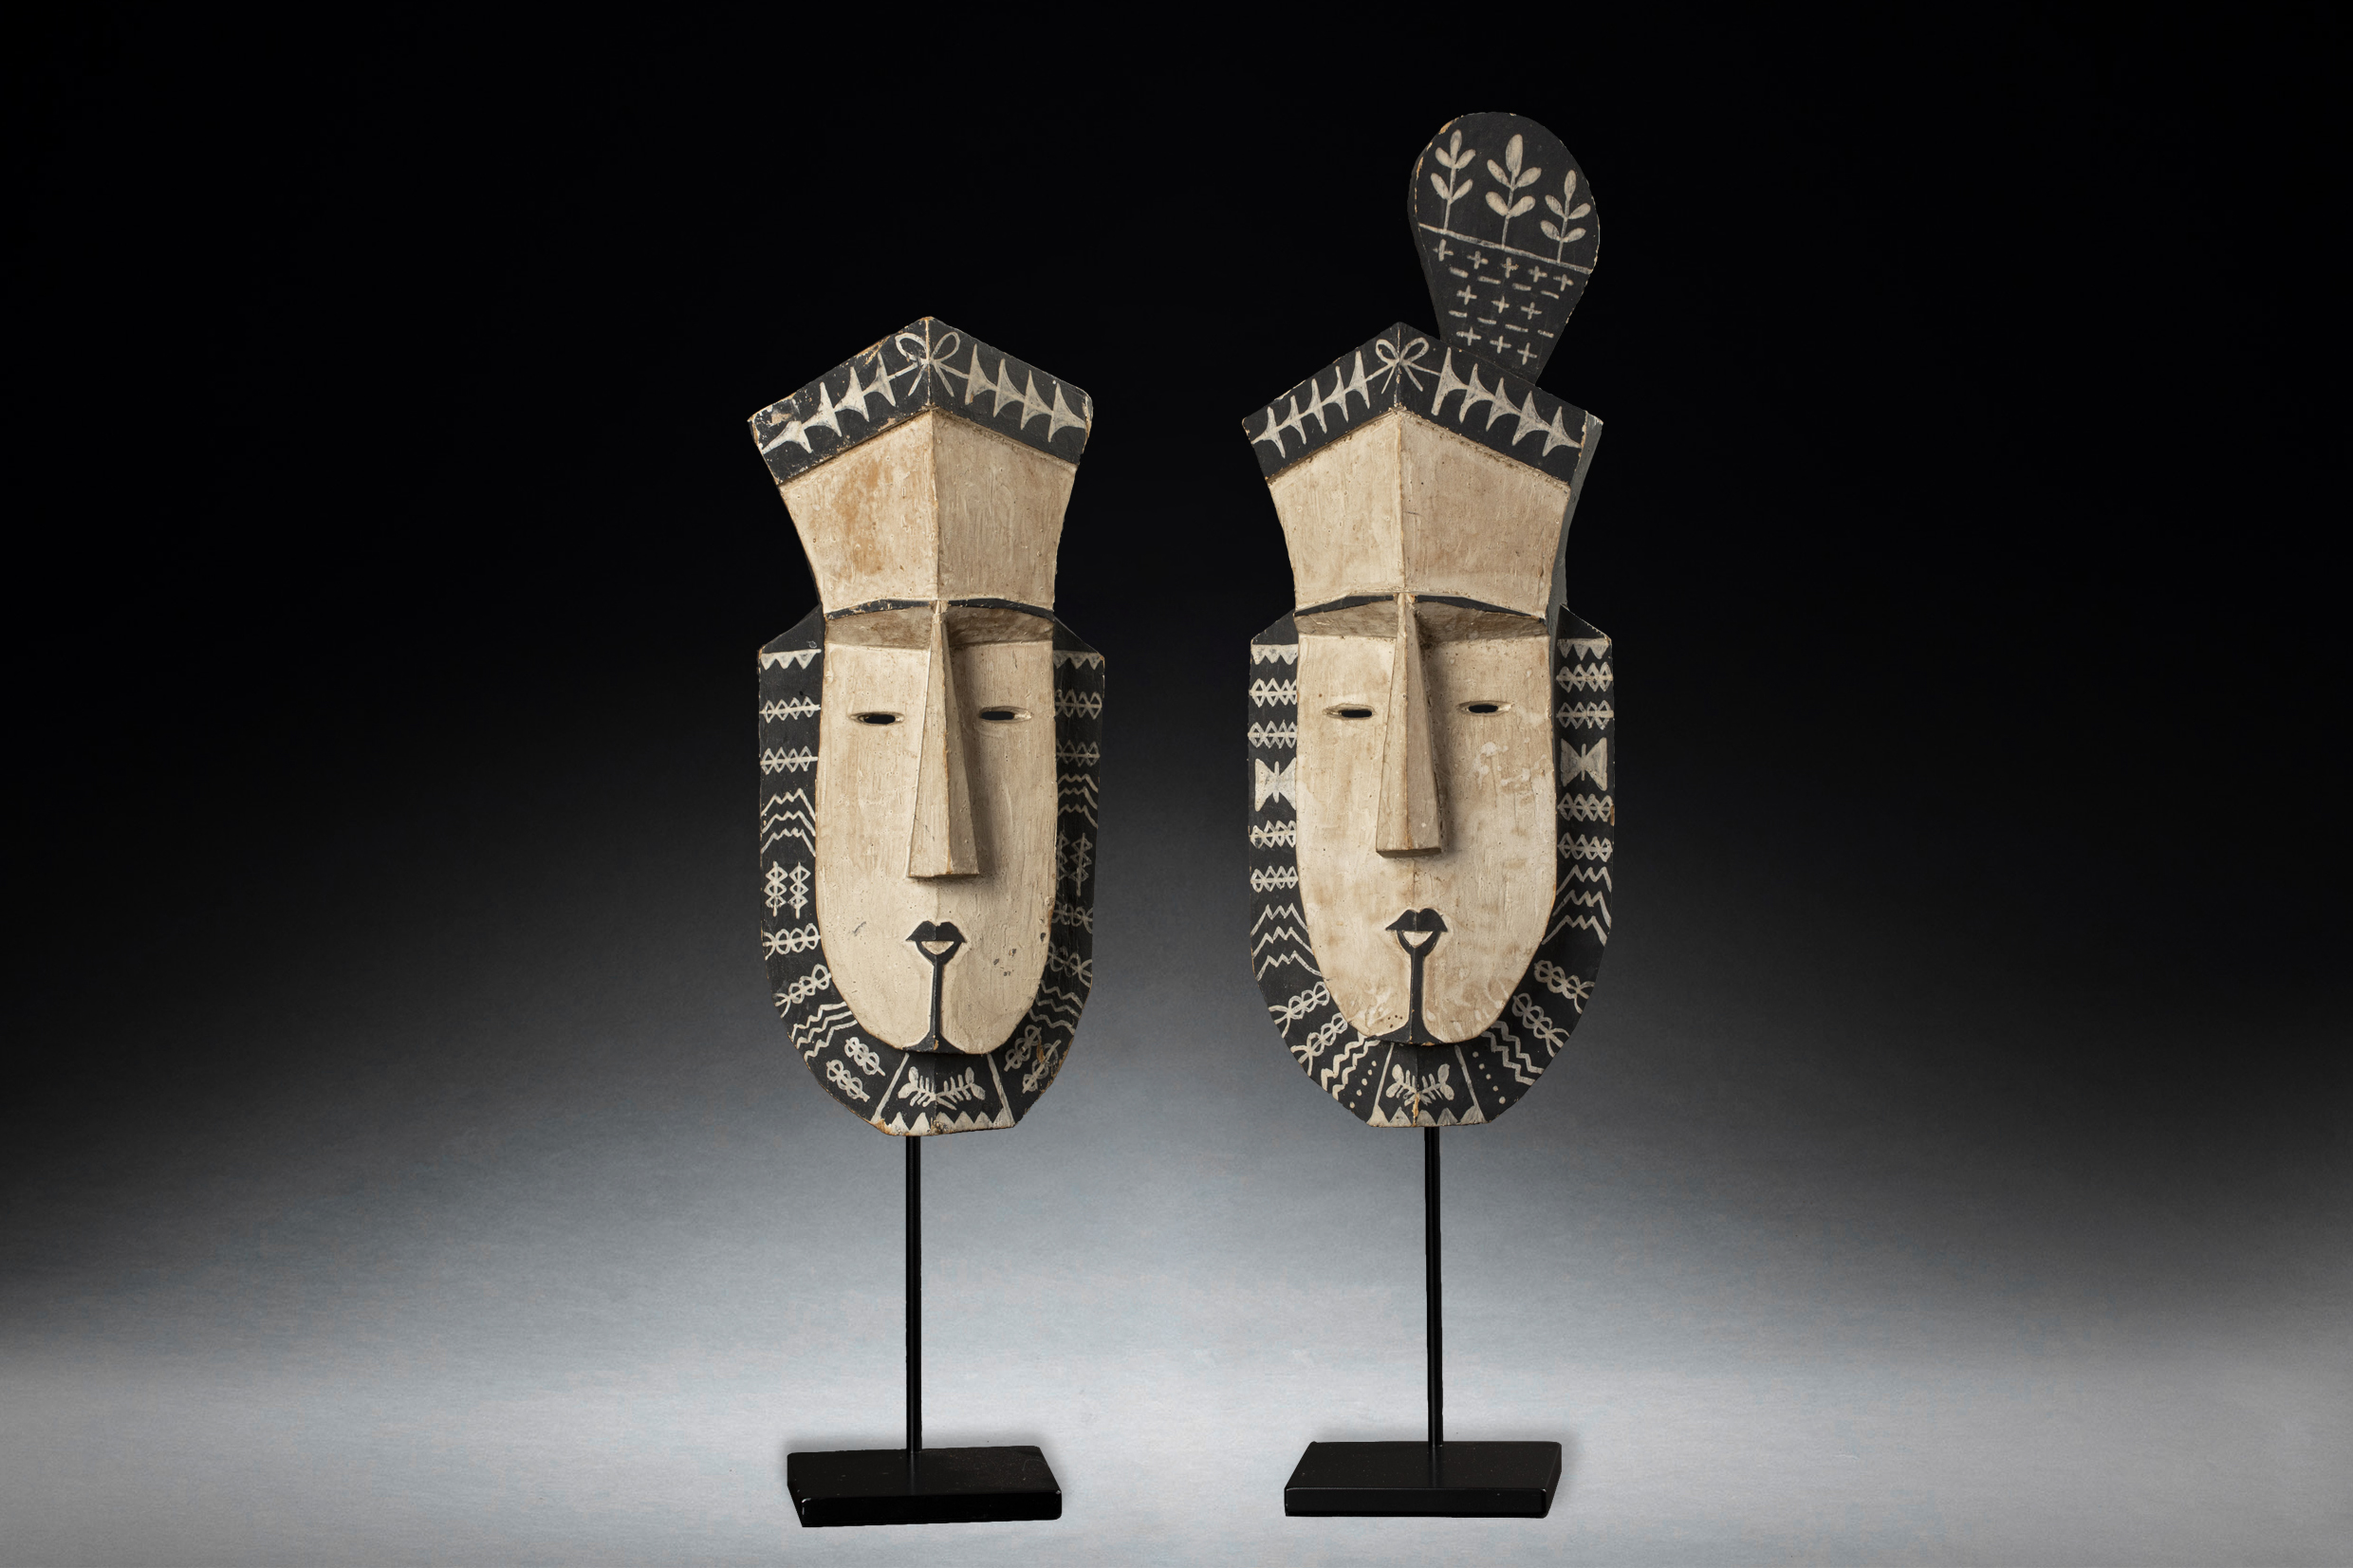 A Fine Old Pair of Mortlock Islands Tapuana Masks from Micronesia